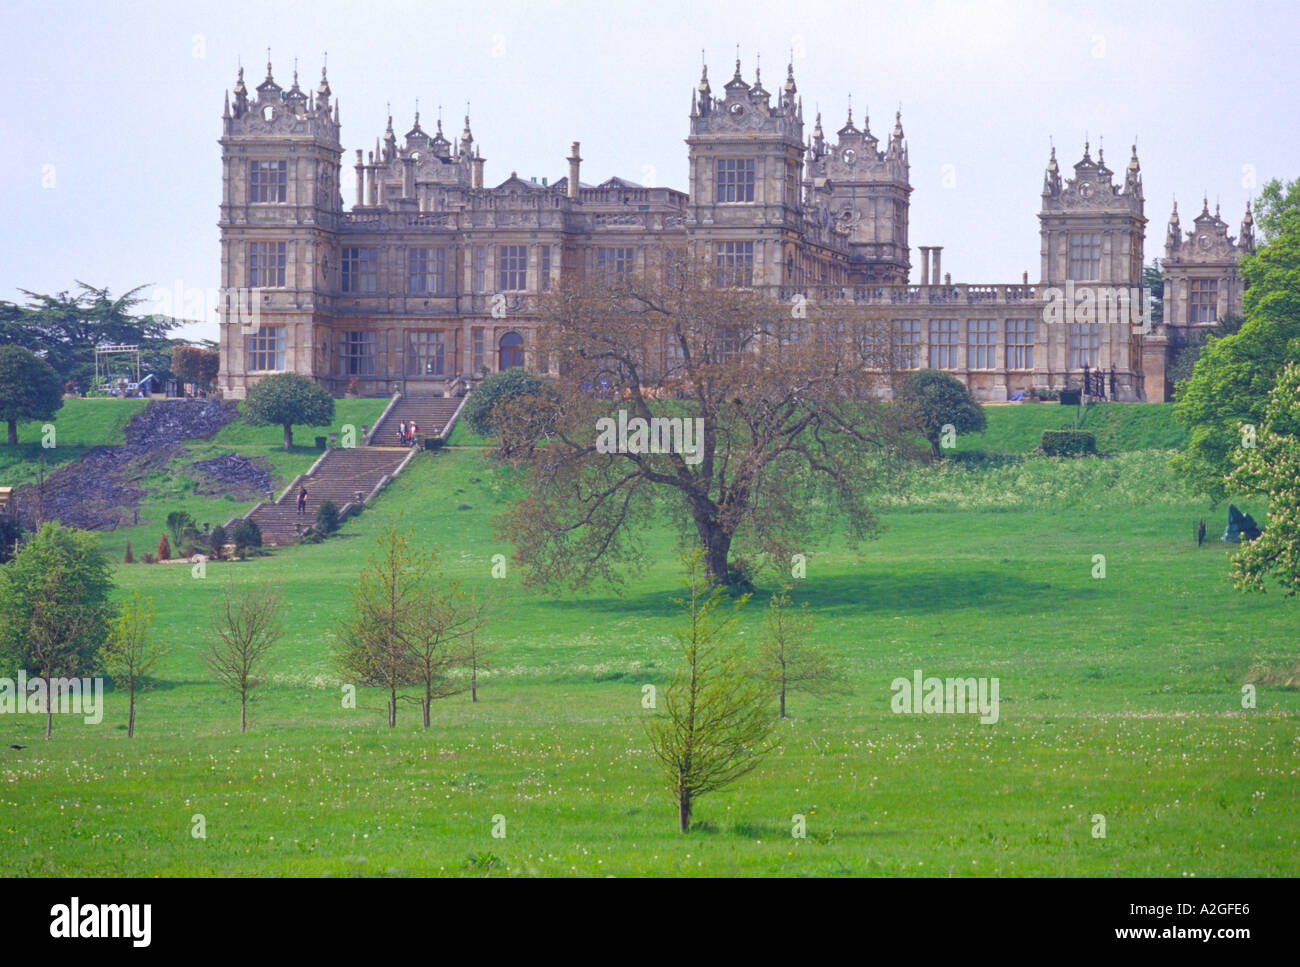 Mentmore Towers Stately Home during filming of motion picture "Batman  Begins Stock Photo - Alamy